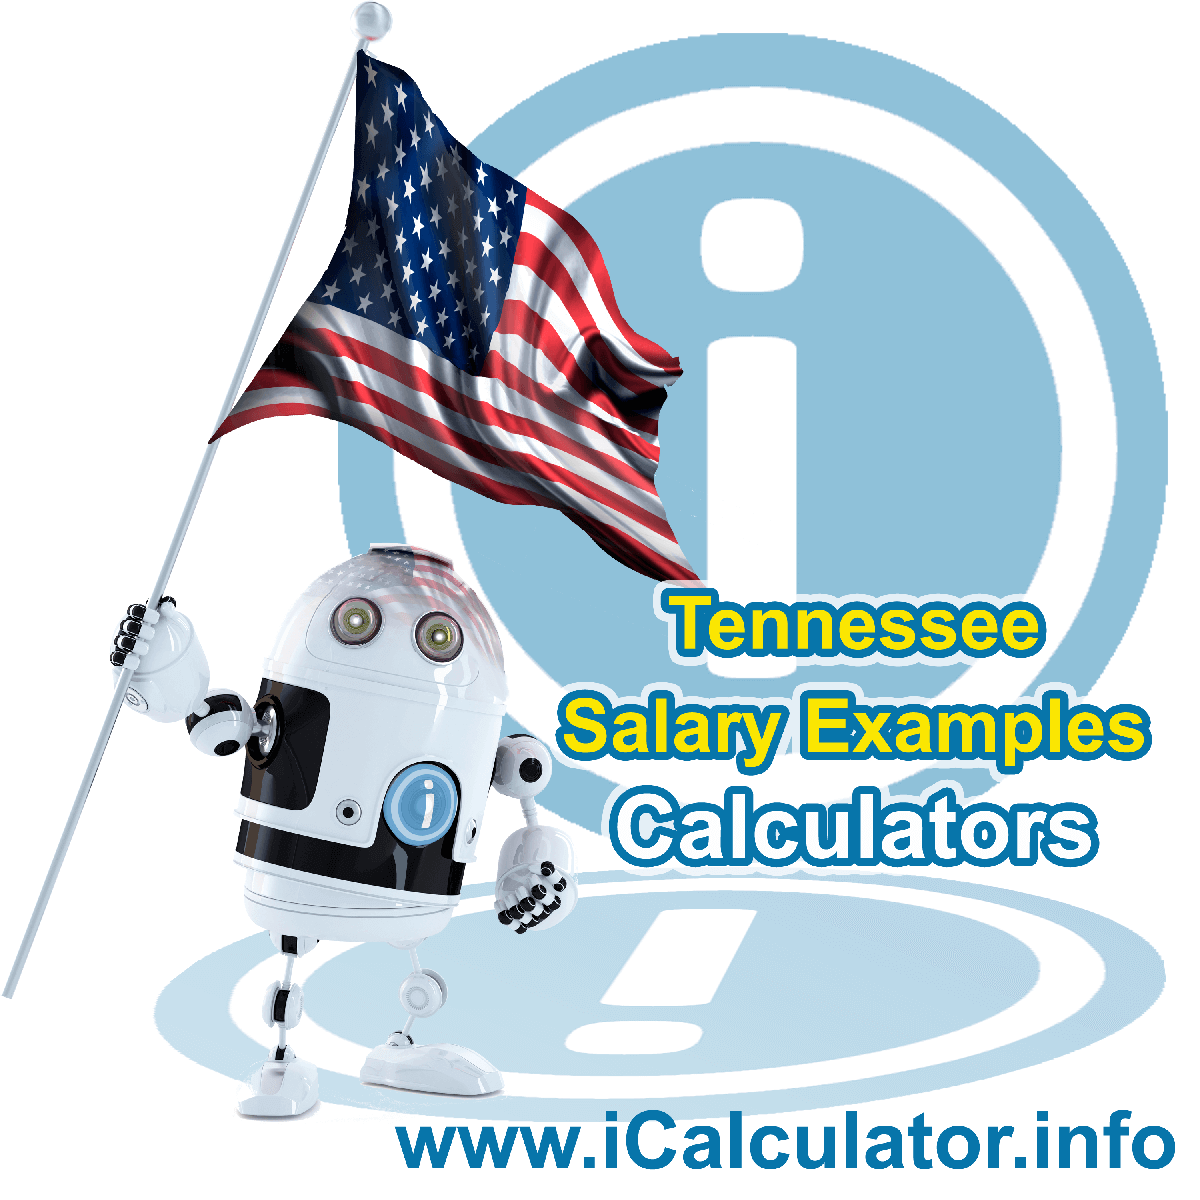 Tennessee Salary Example for $150,000.00 in 2022 | iCalculator™ | $150,000.00 salary example for employee and employer paying Tennessee State tincome taxes. Detailed salary after tax calculation including Tennessee State Tax, Federal State Tax, Medicare Deductions, Social Security, Capital Gains and other income tax and salary deductions complete with supporting Tennessee state tax tables 